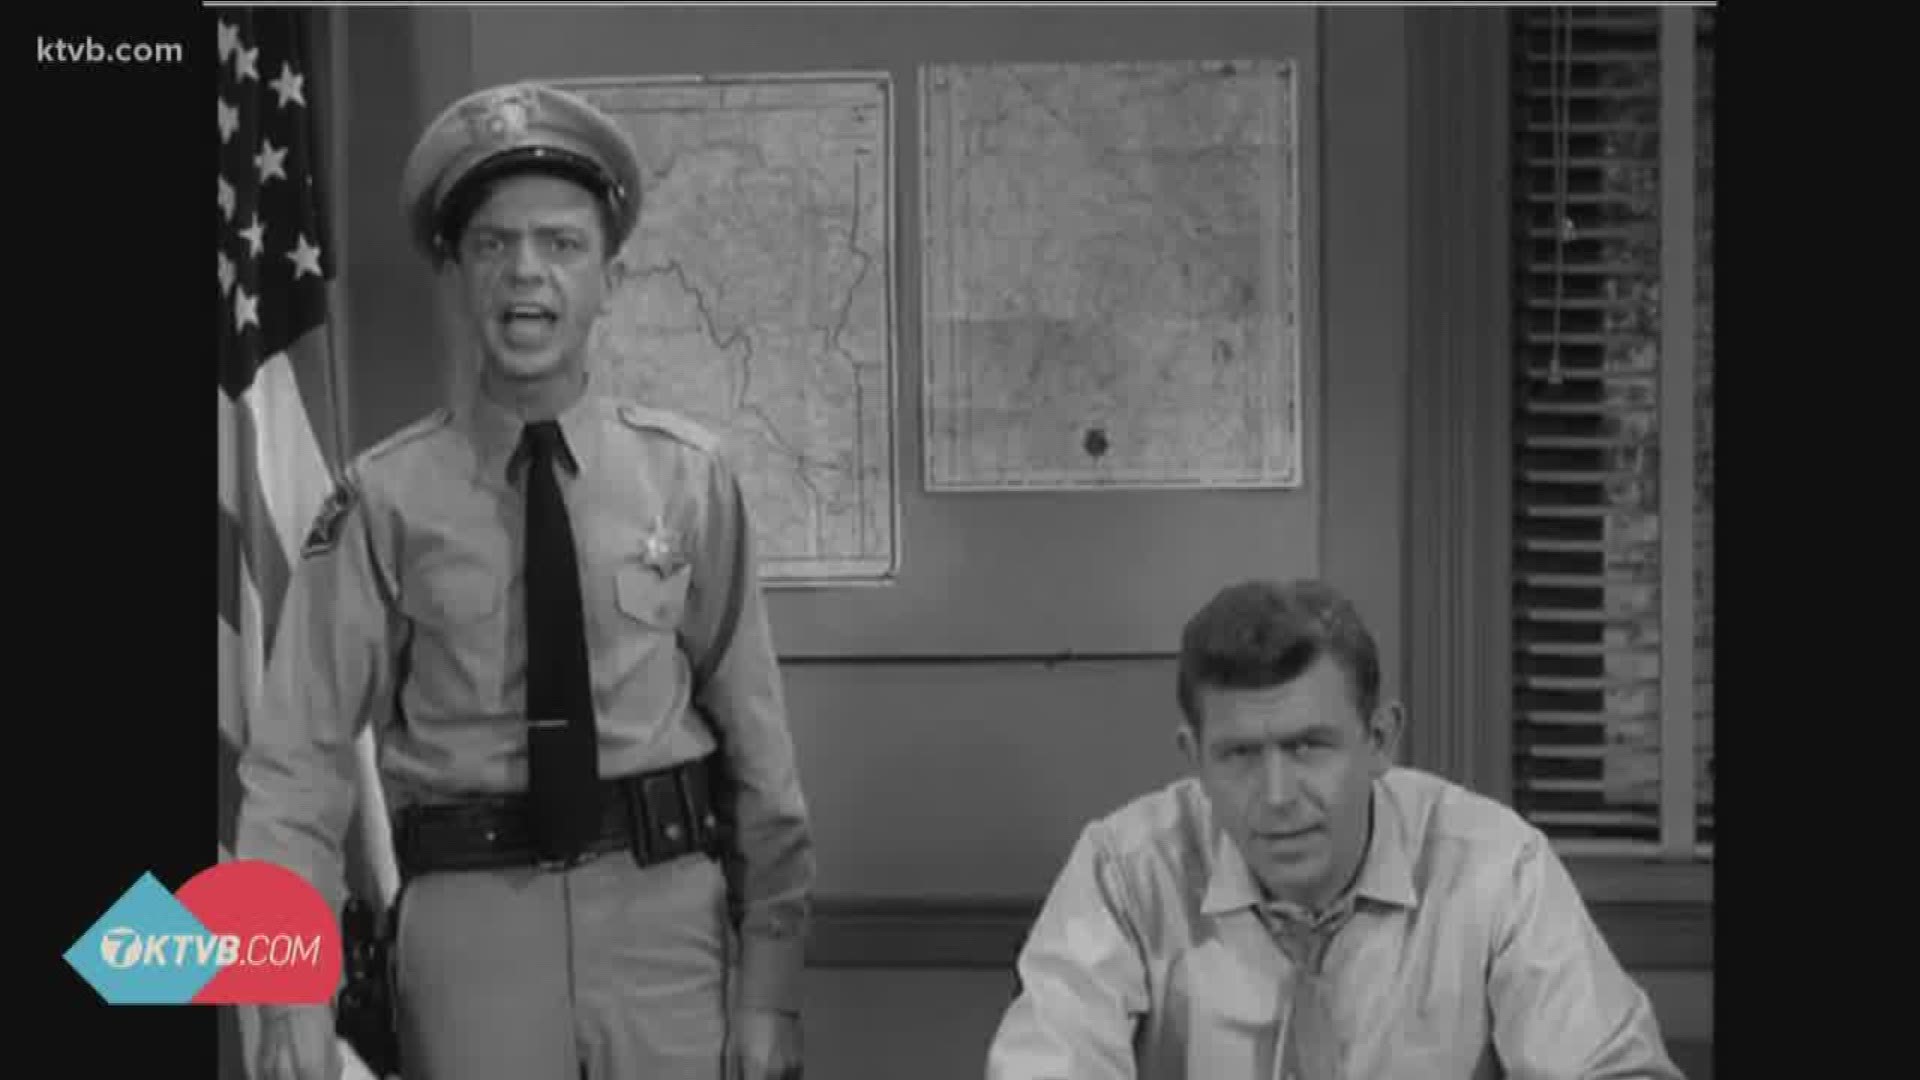 If you are a fan of the Andy Griffith TV show you may have noticed something a little off in season one. A map on the wall in Andy's office shows Idaho upside down.